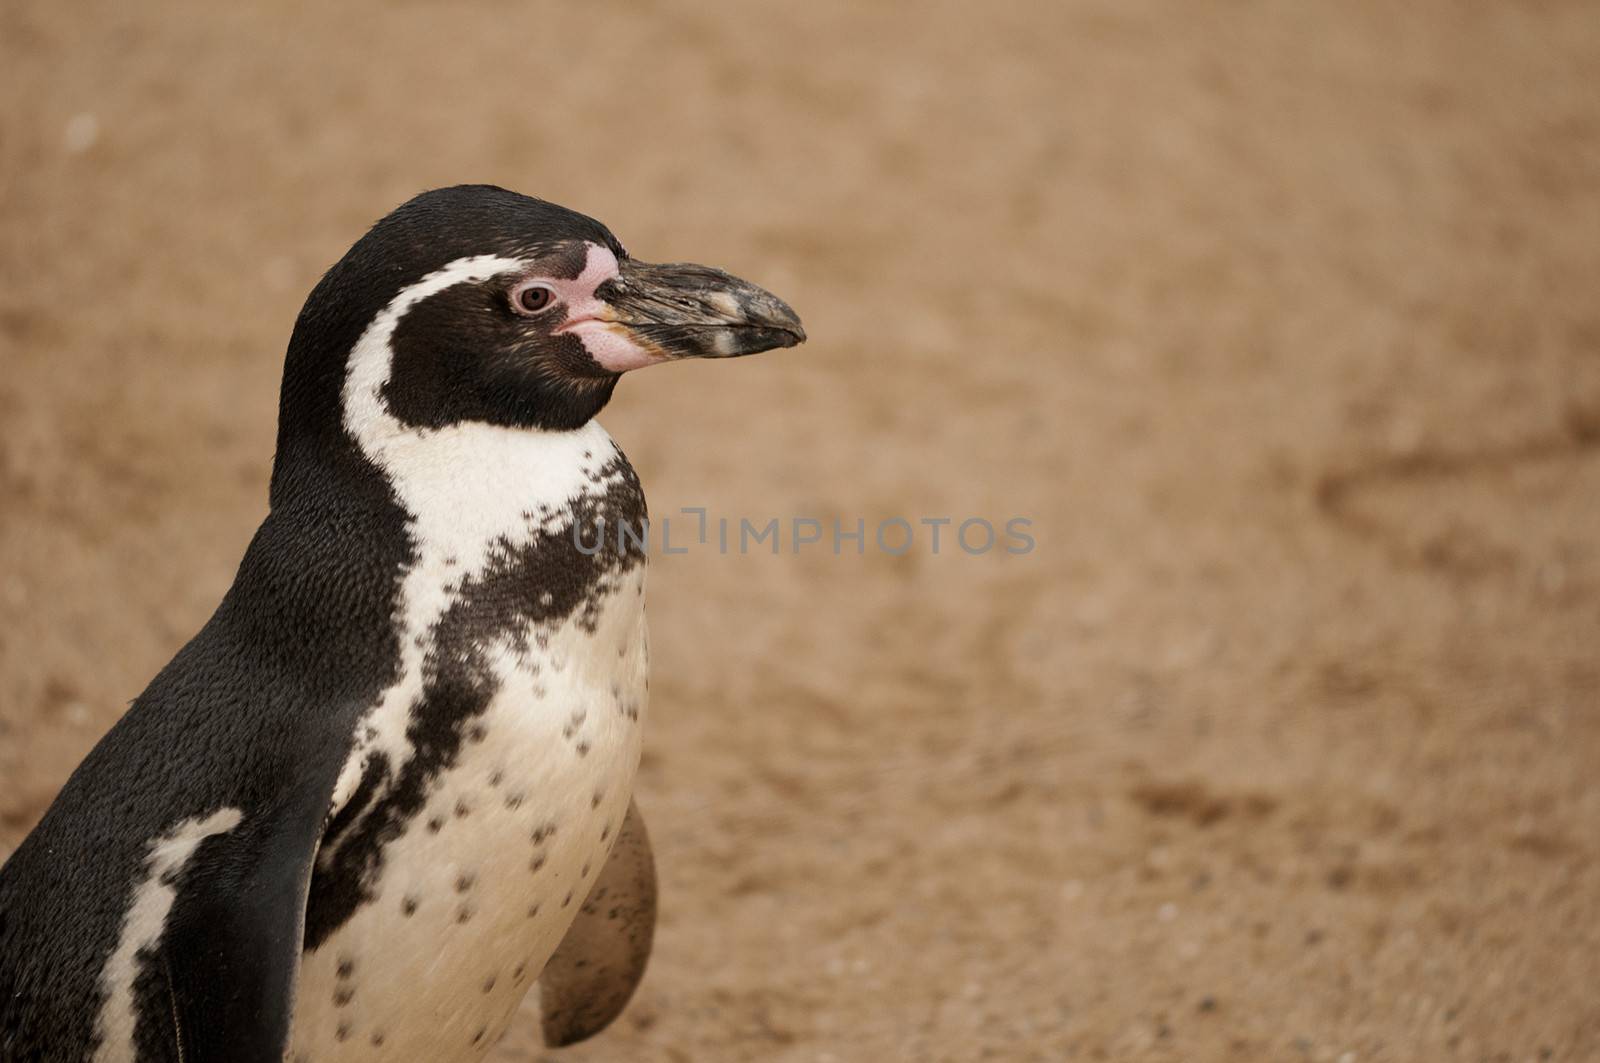 The Magellanic Penguin (Spheniscus magellanicus) is a South American penguin, breeding in coastal Argentina, Chile and the Falkland Islands, with some migrating to Brazil where they are occasionally seen as far north as Rio de Janeiro. It is the most numerous of the Spheniscus penguins.